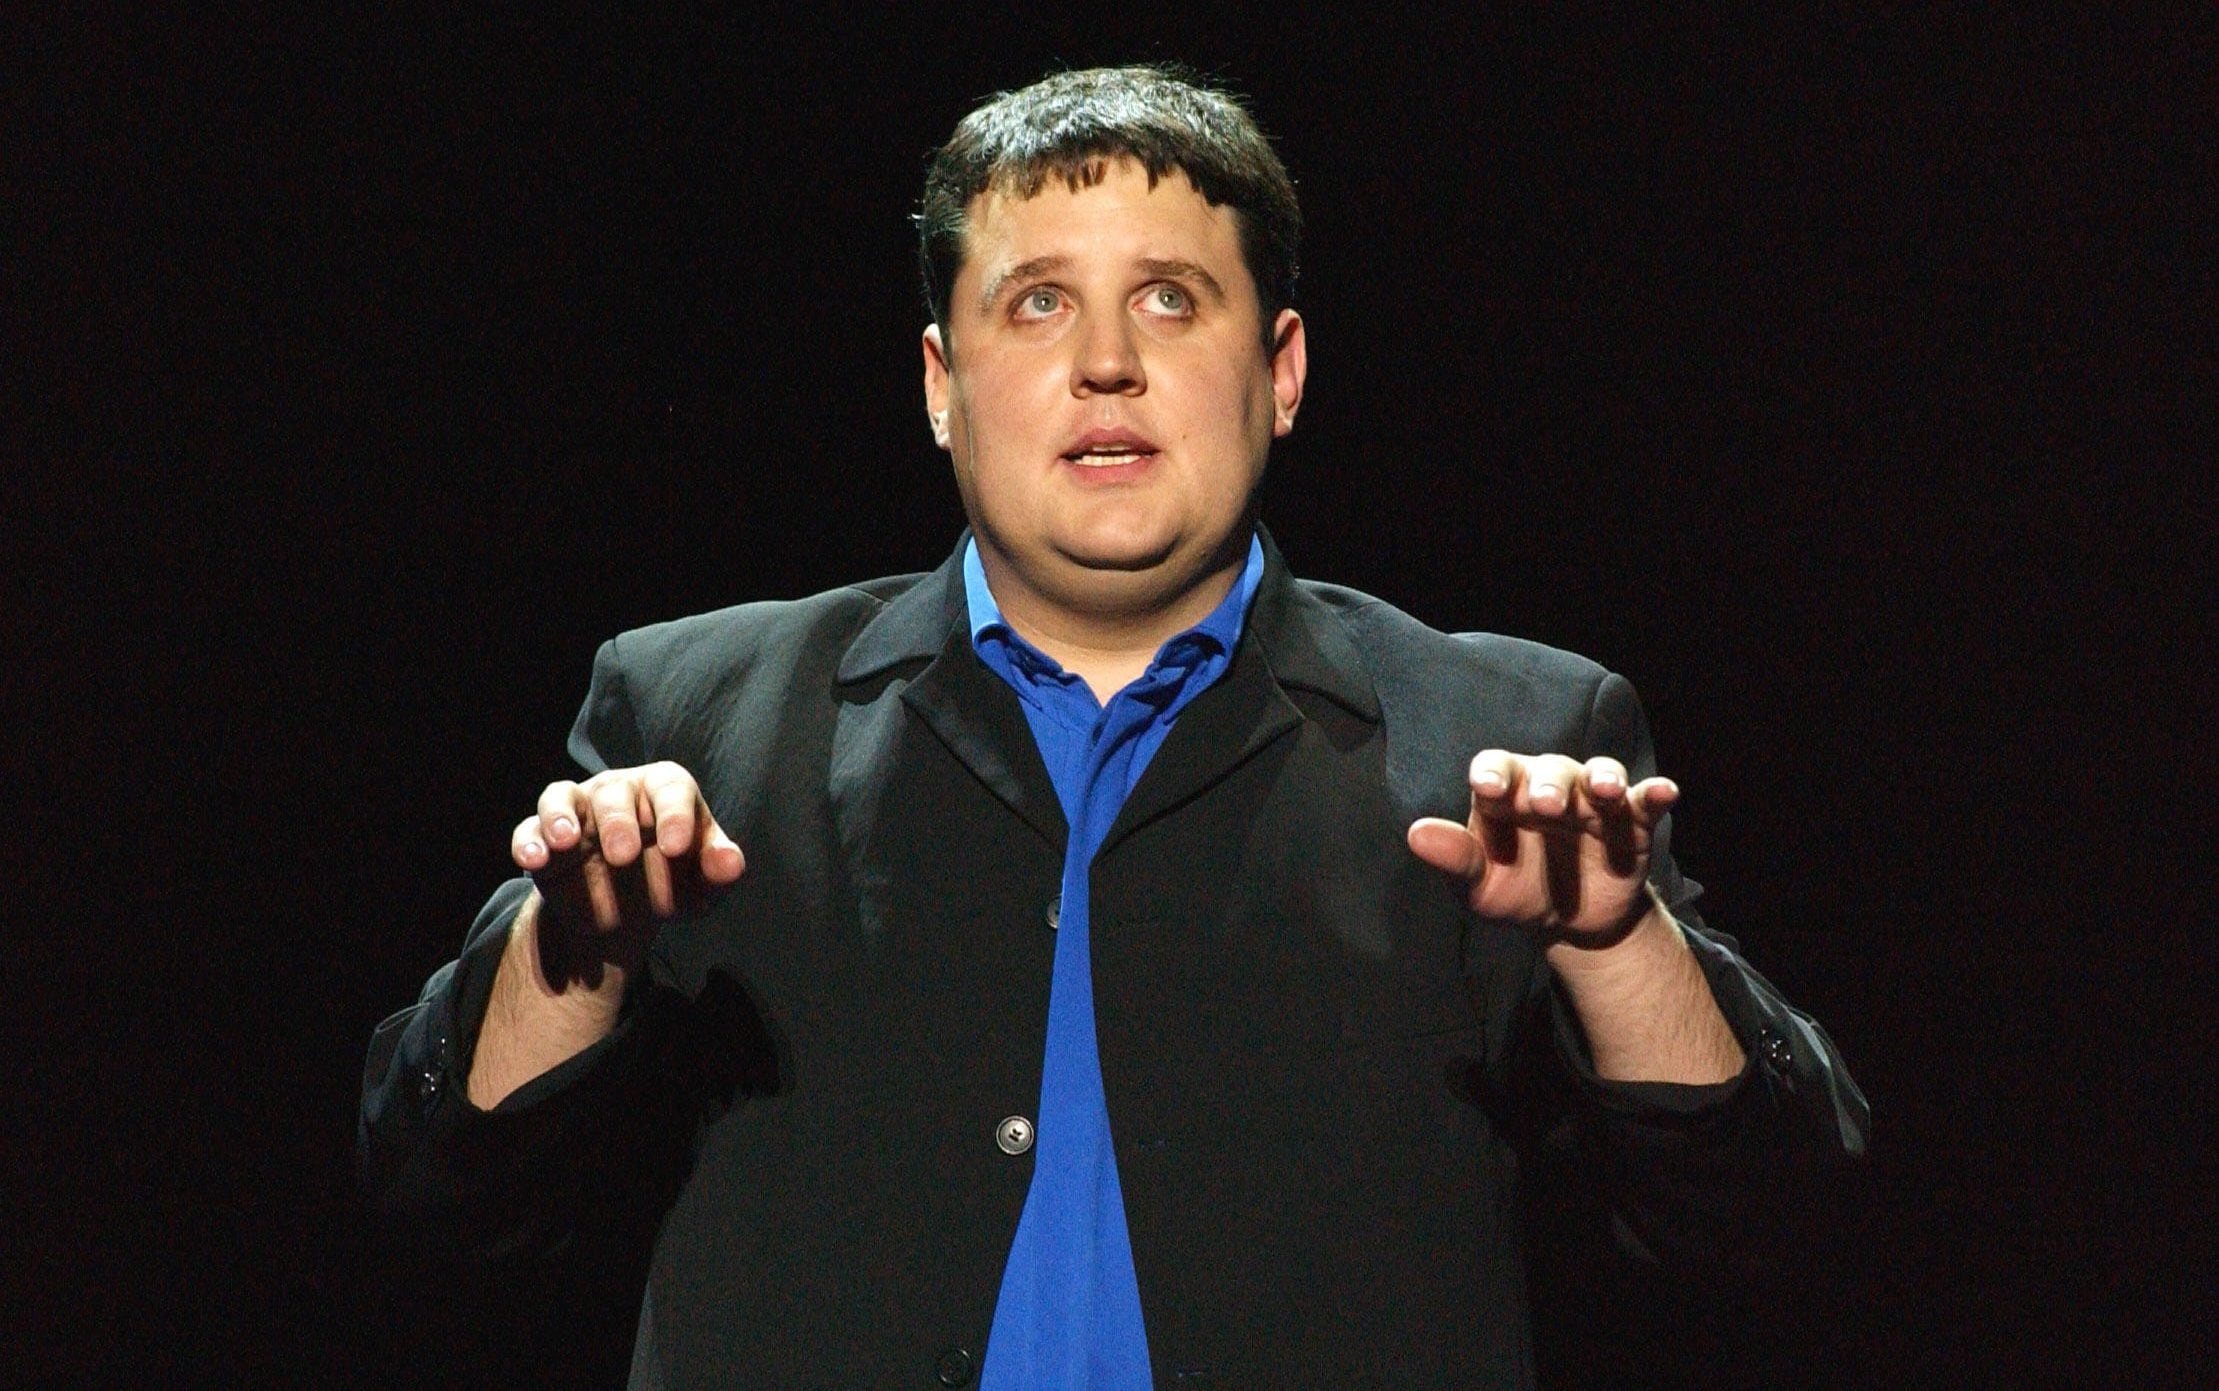 peter kay, utilita arena, birmingham, review: kay’s rare common touch shines through - but he needs more gags up his sleeve